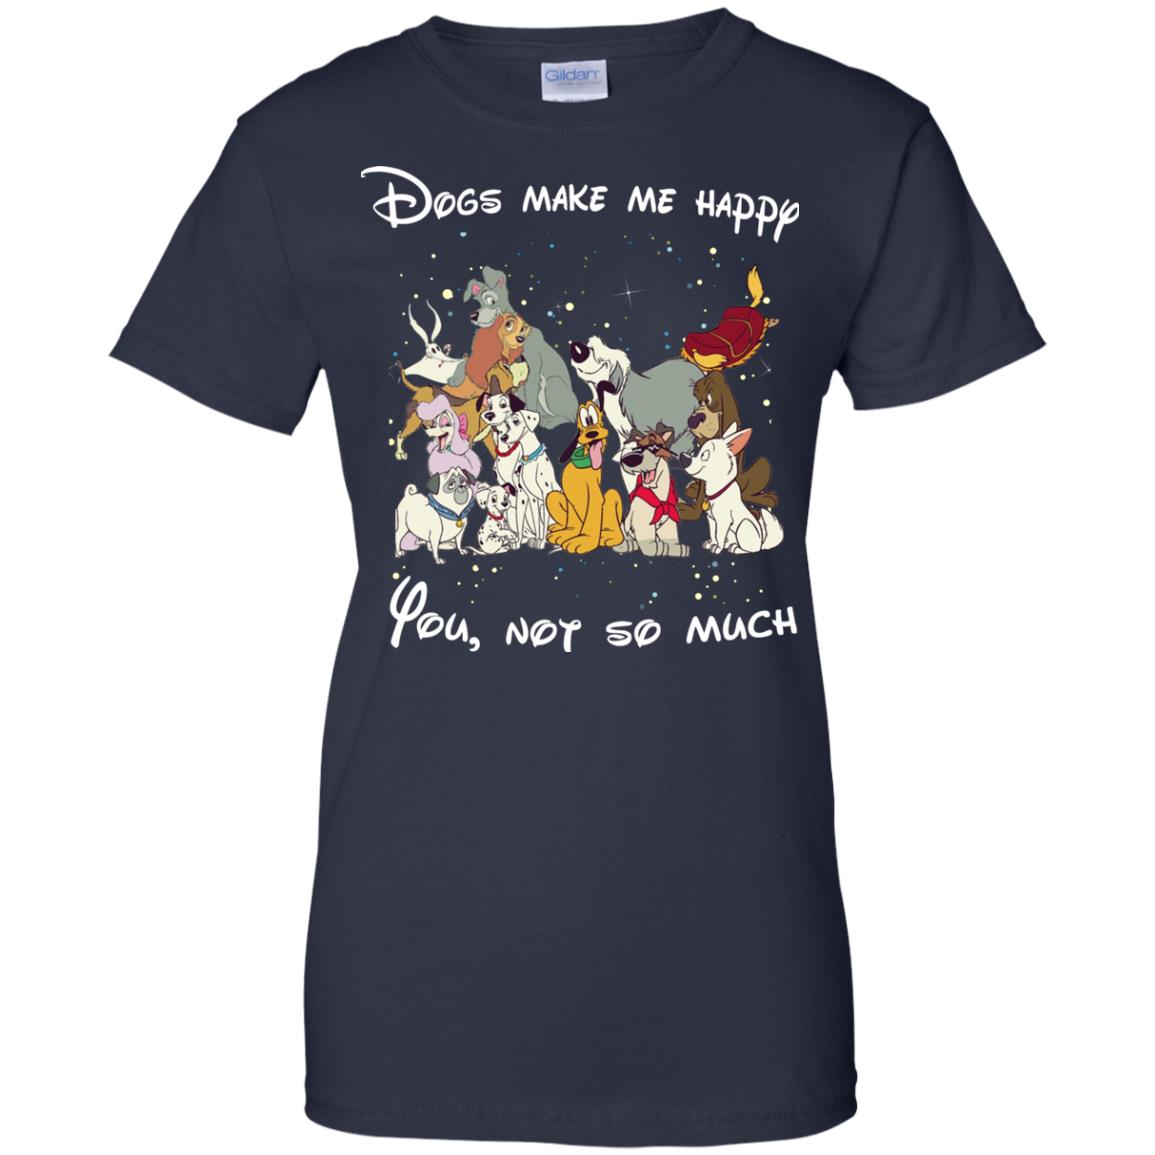 Disney dogs Dogs make me happy you not so much tshirt